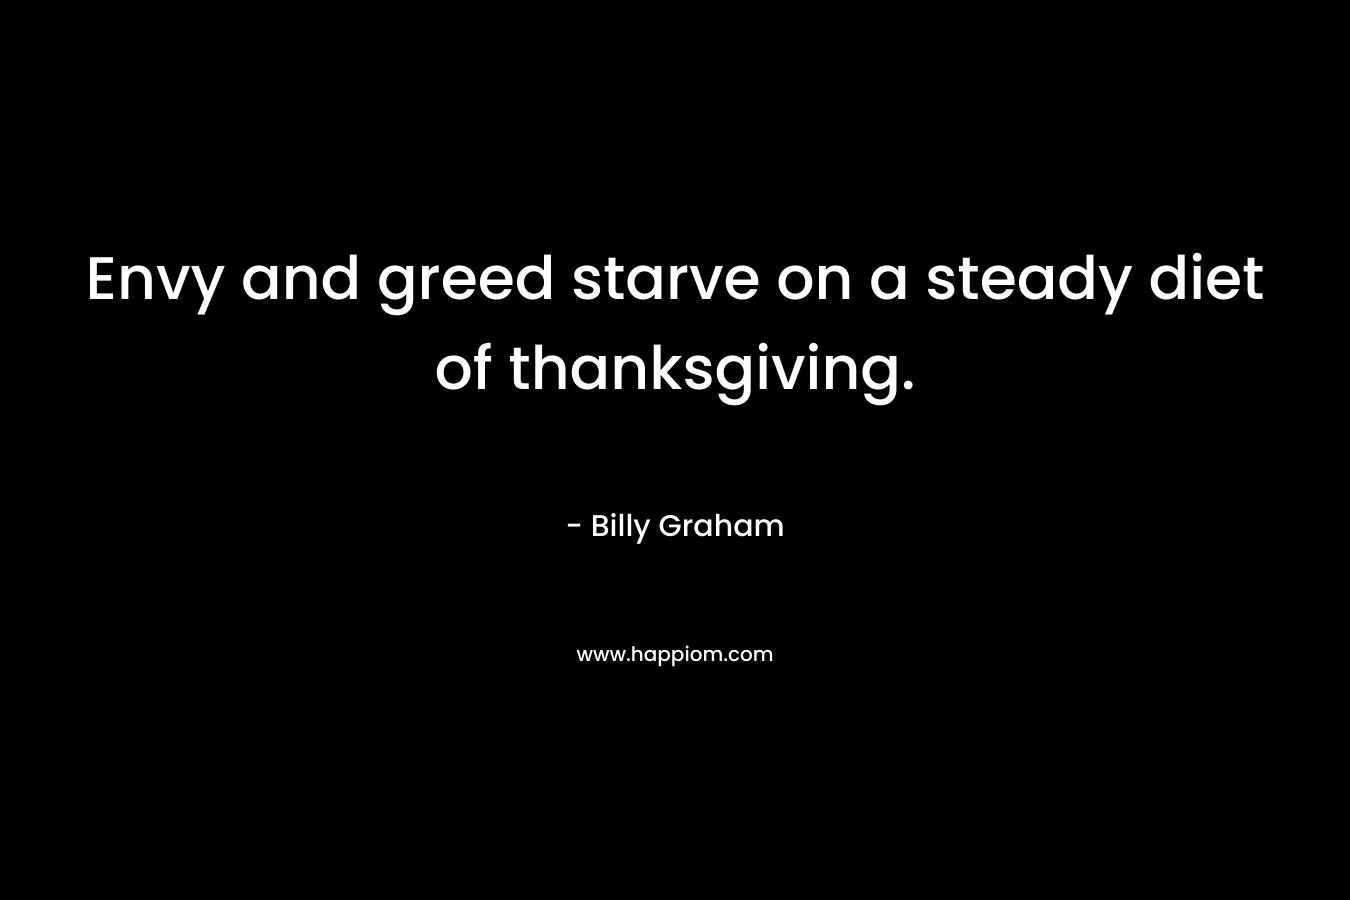 Envy and greed starve on a steady diet of thanksgiving. – Billy Graham